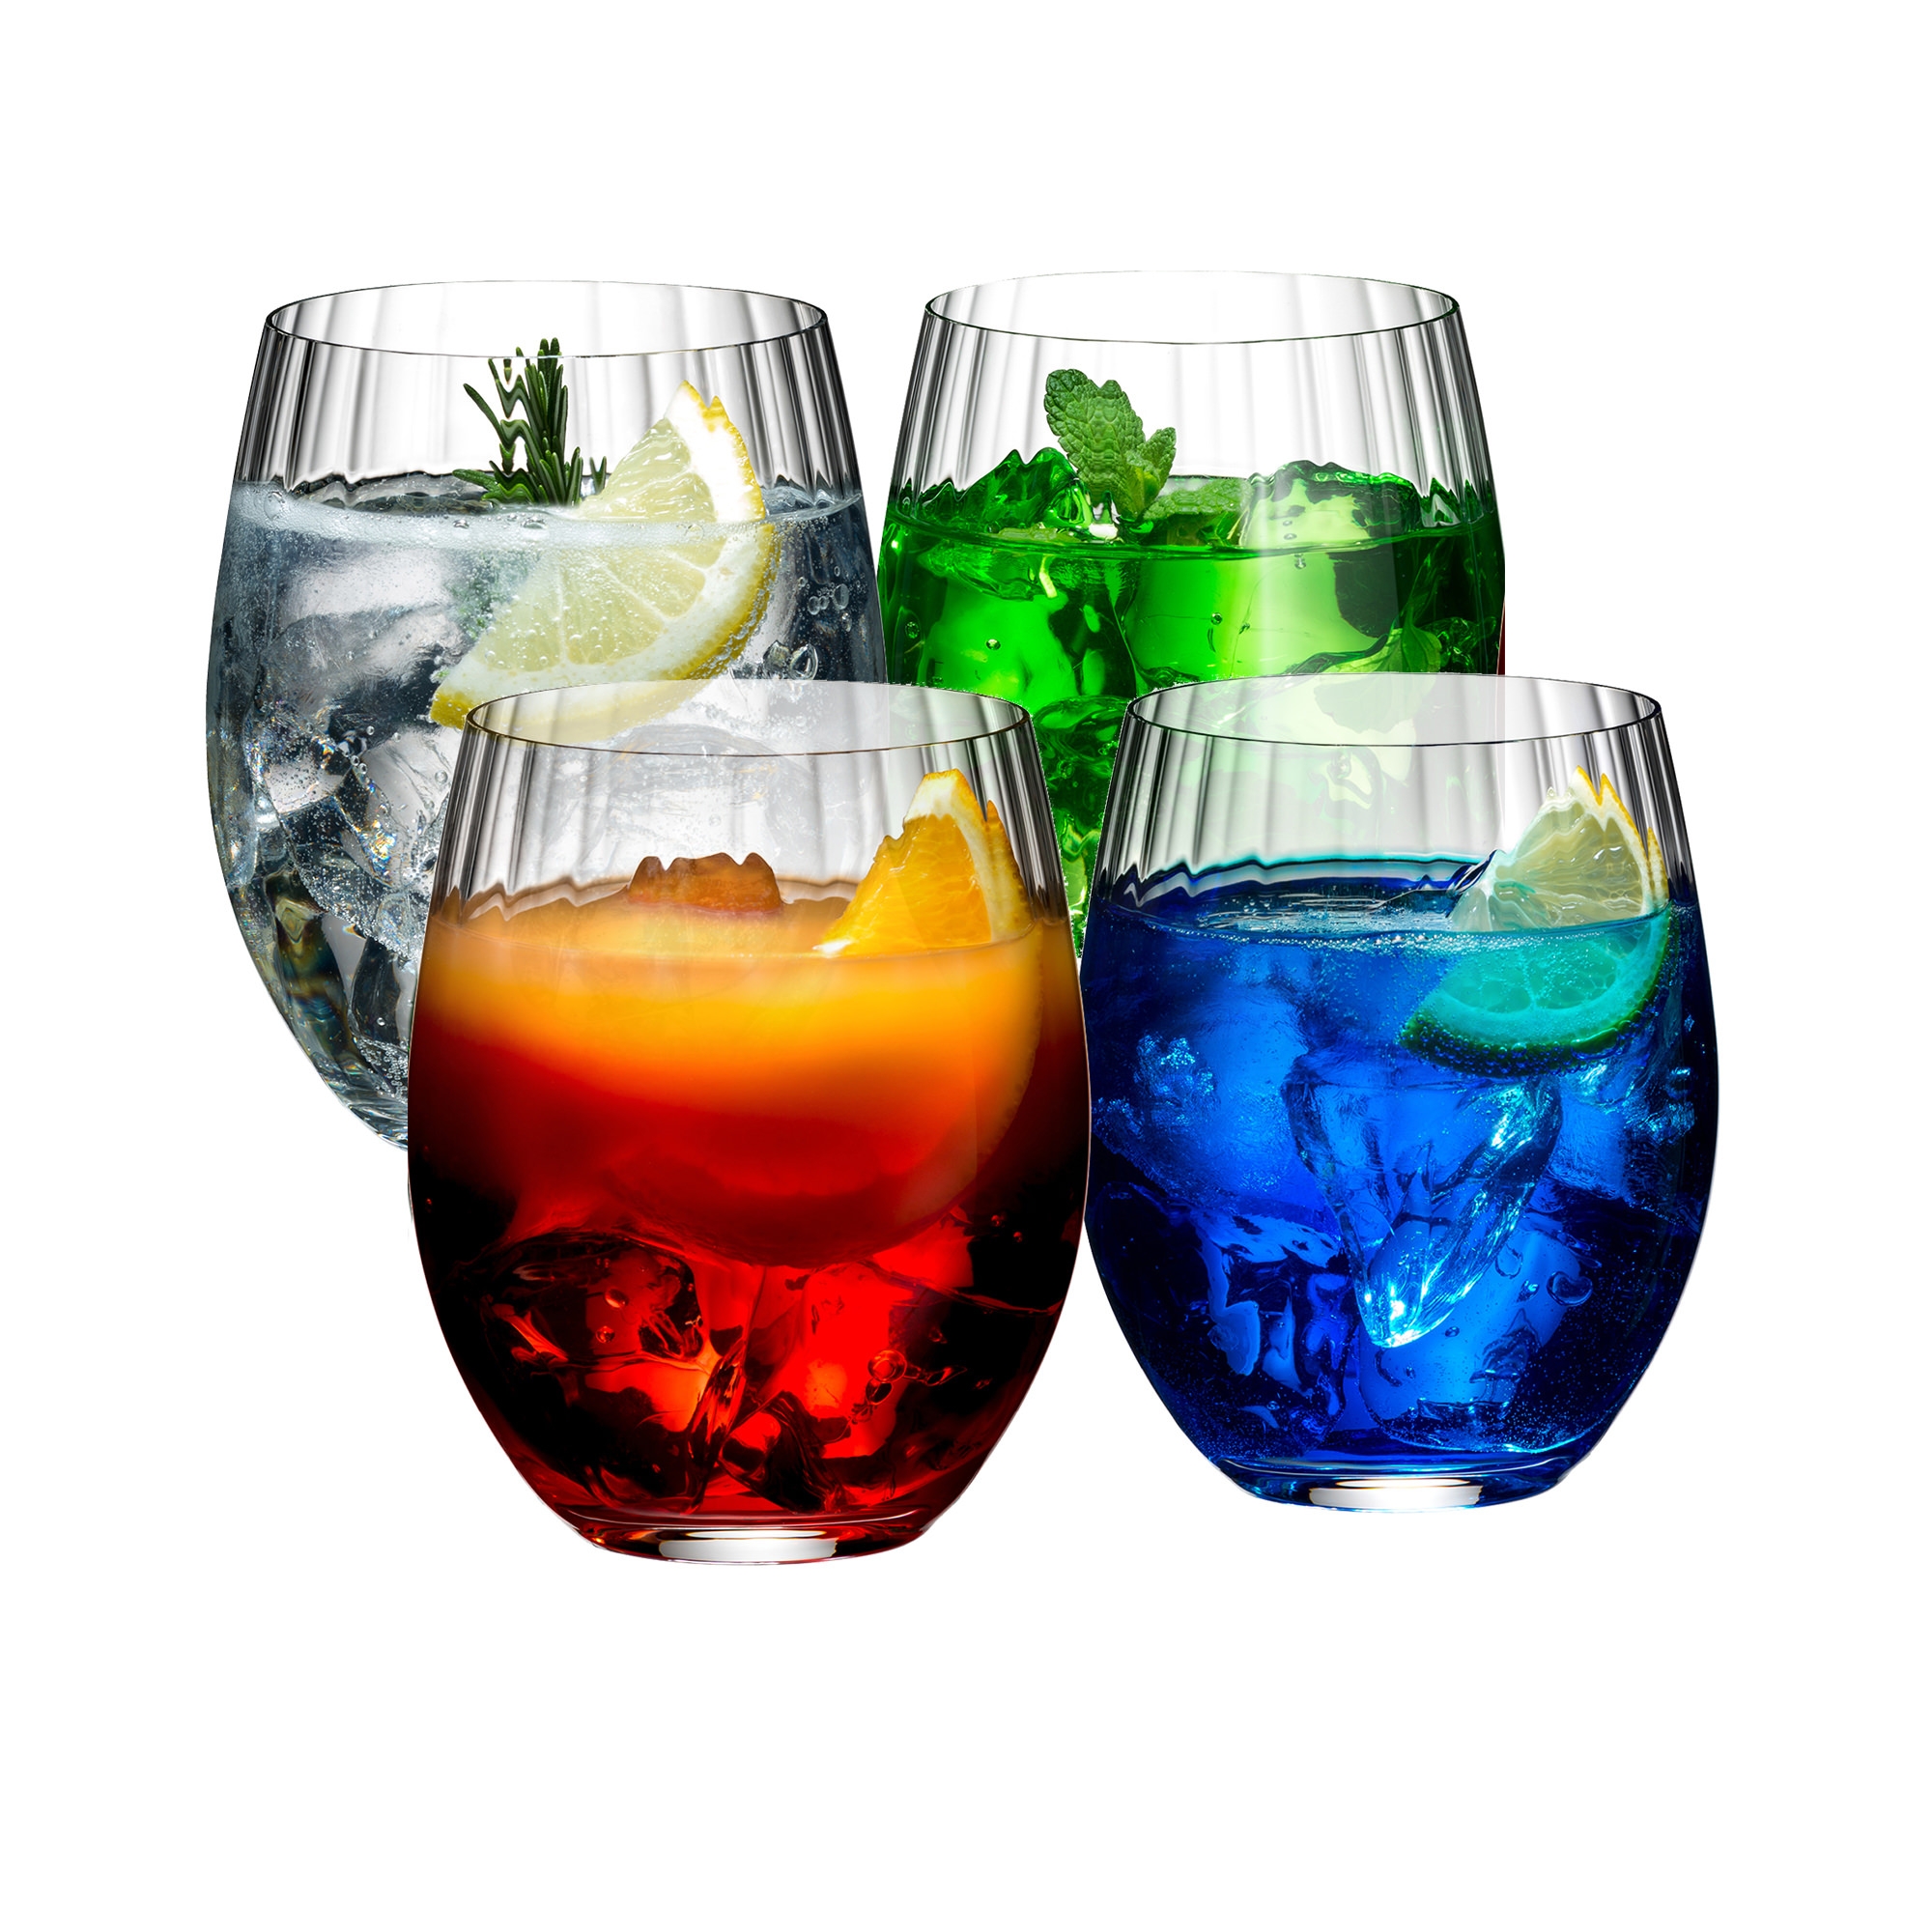 Riedel Mixing Tonic Glass 580ml Set of 4 Image 1